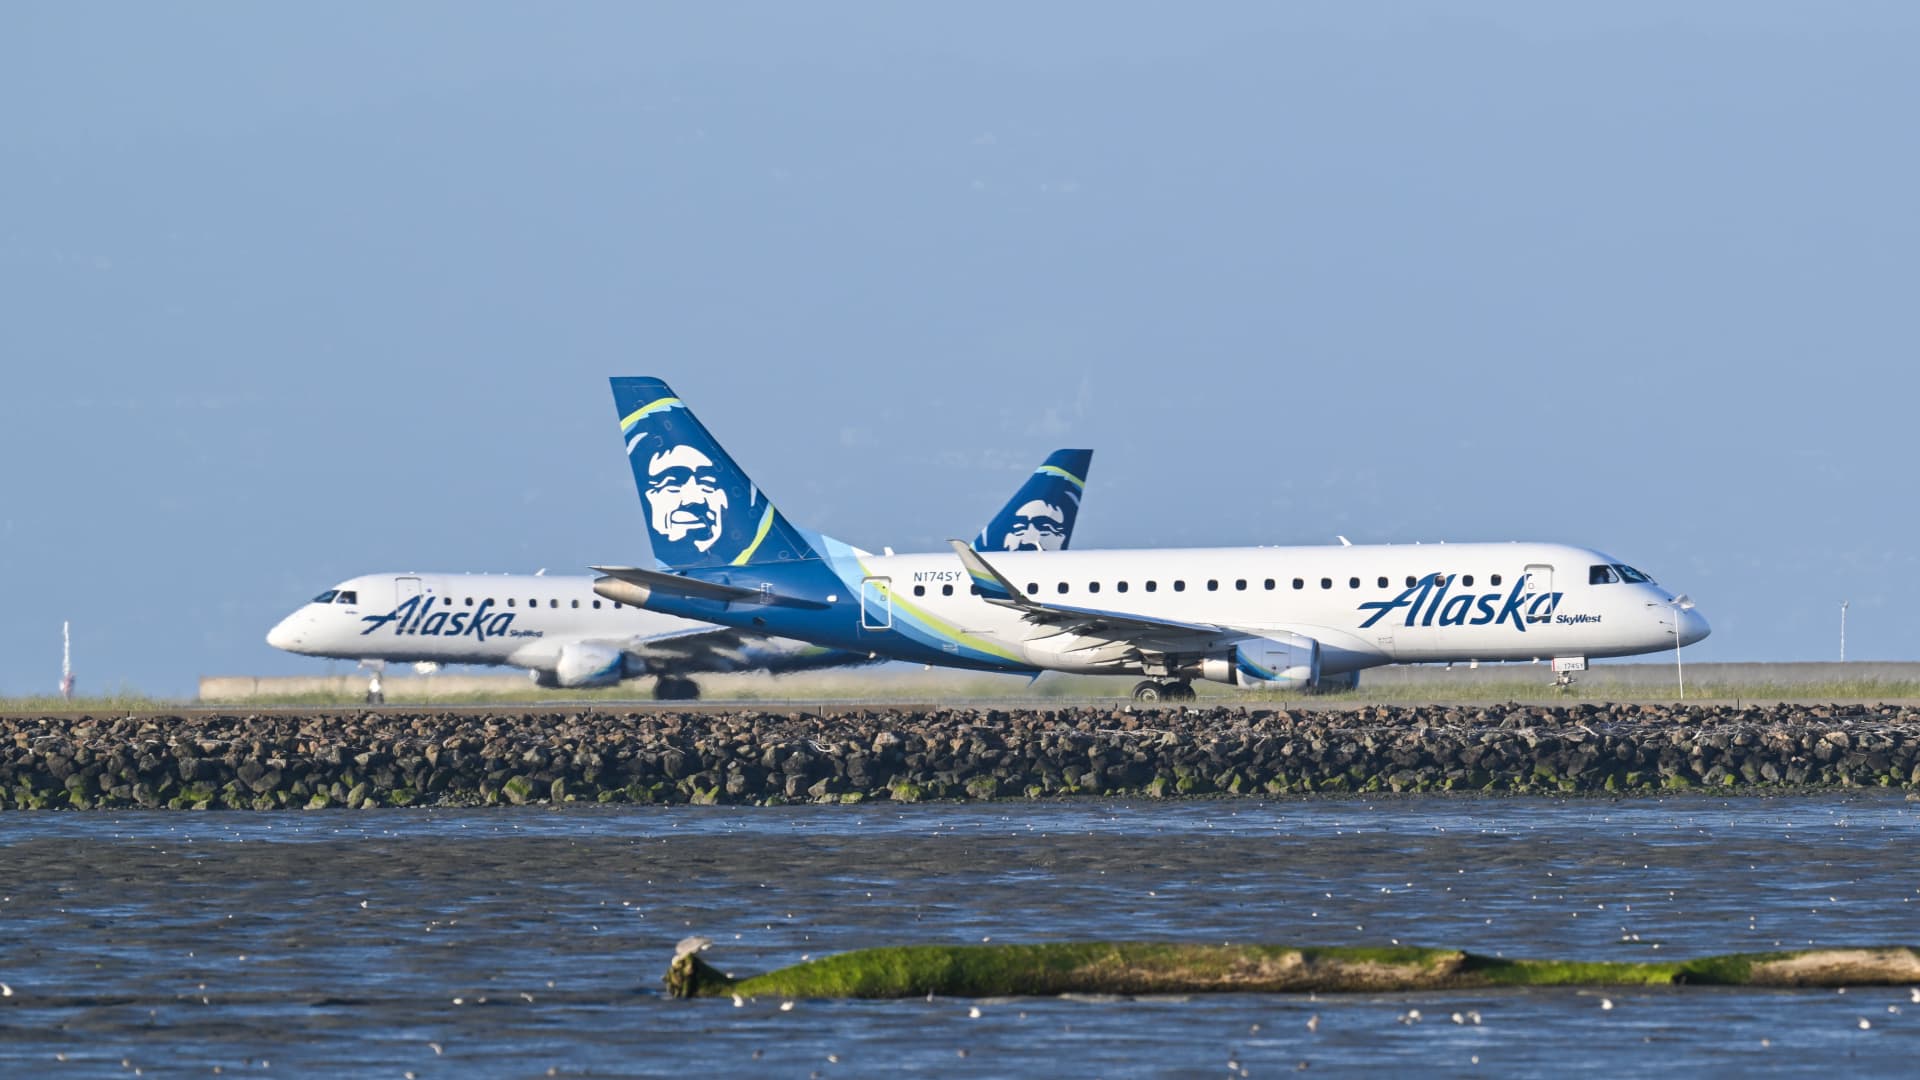 Alaska Airlines ranked as the best U.S. airline, according to a recent WalletHub report.